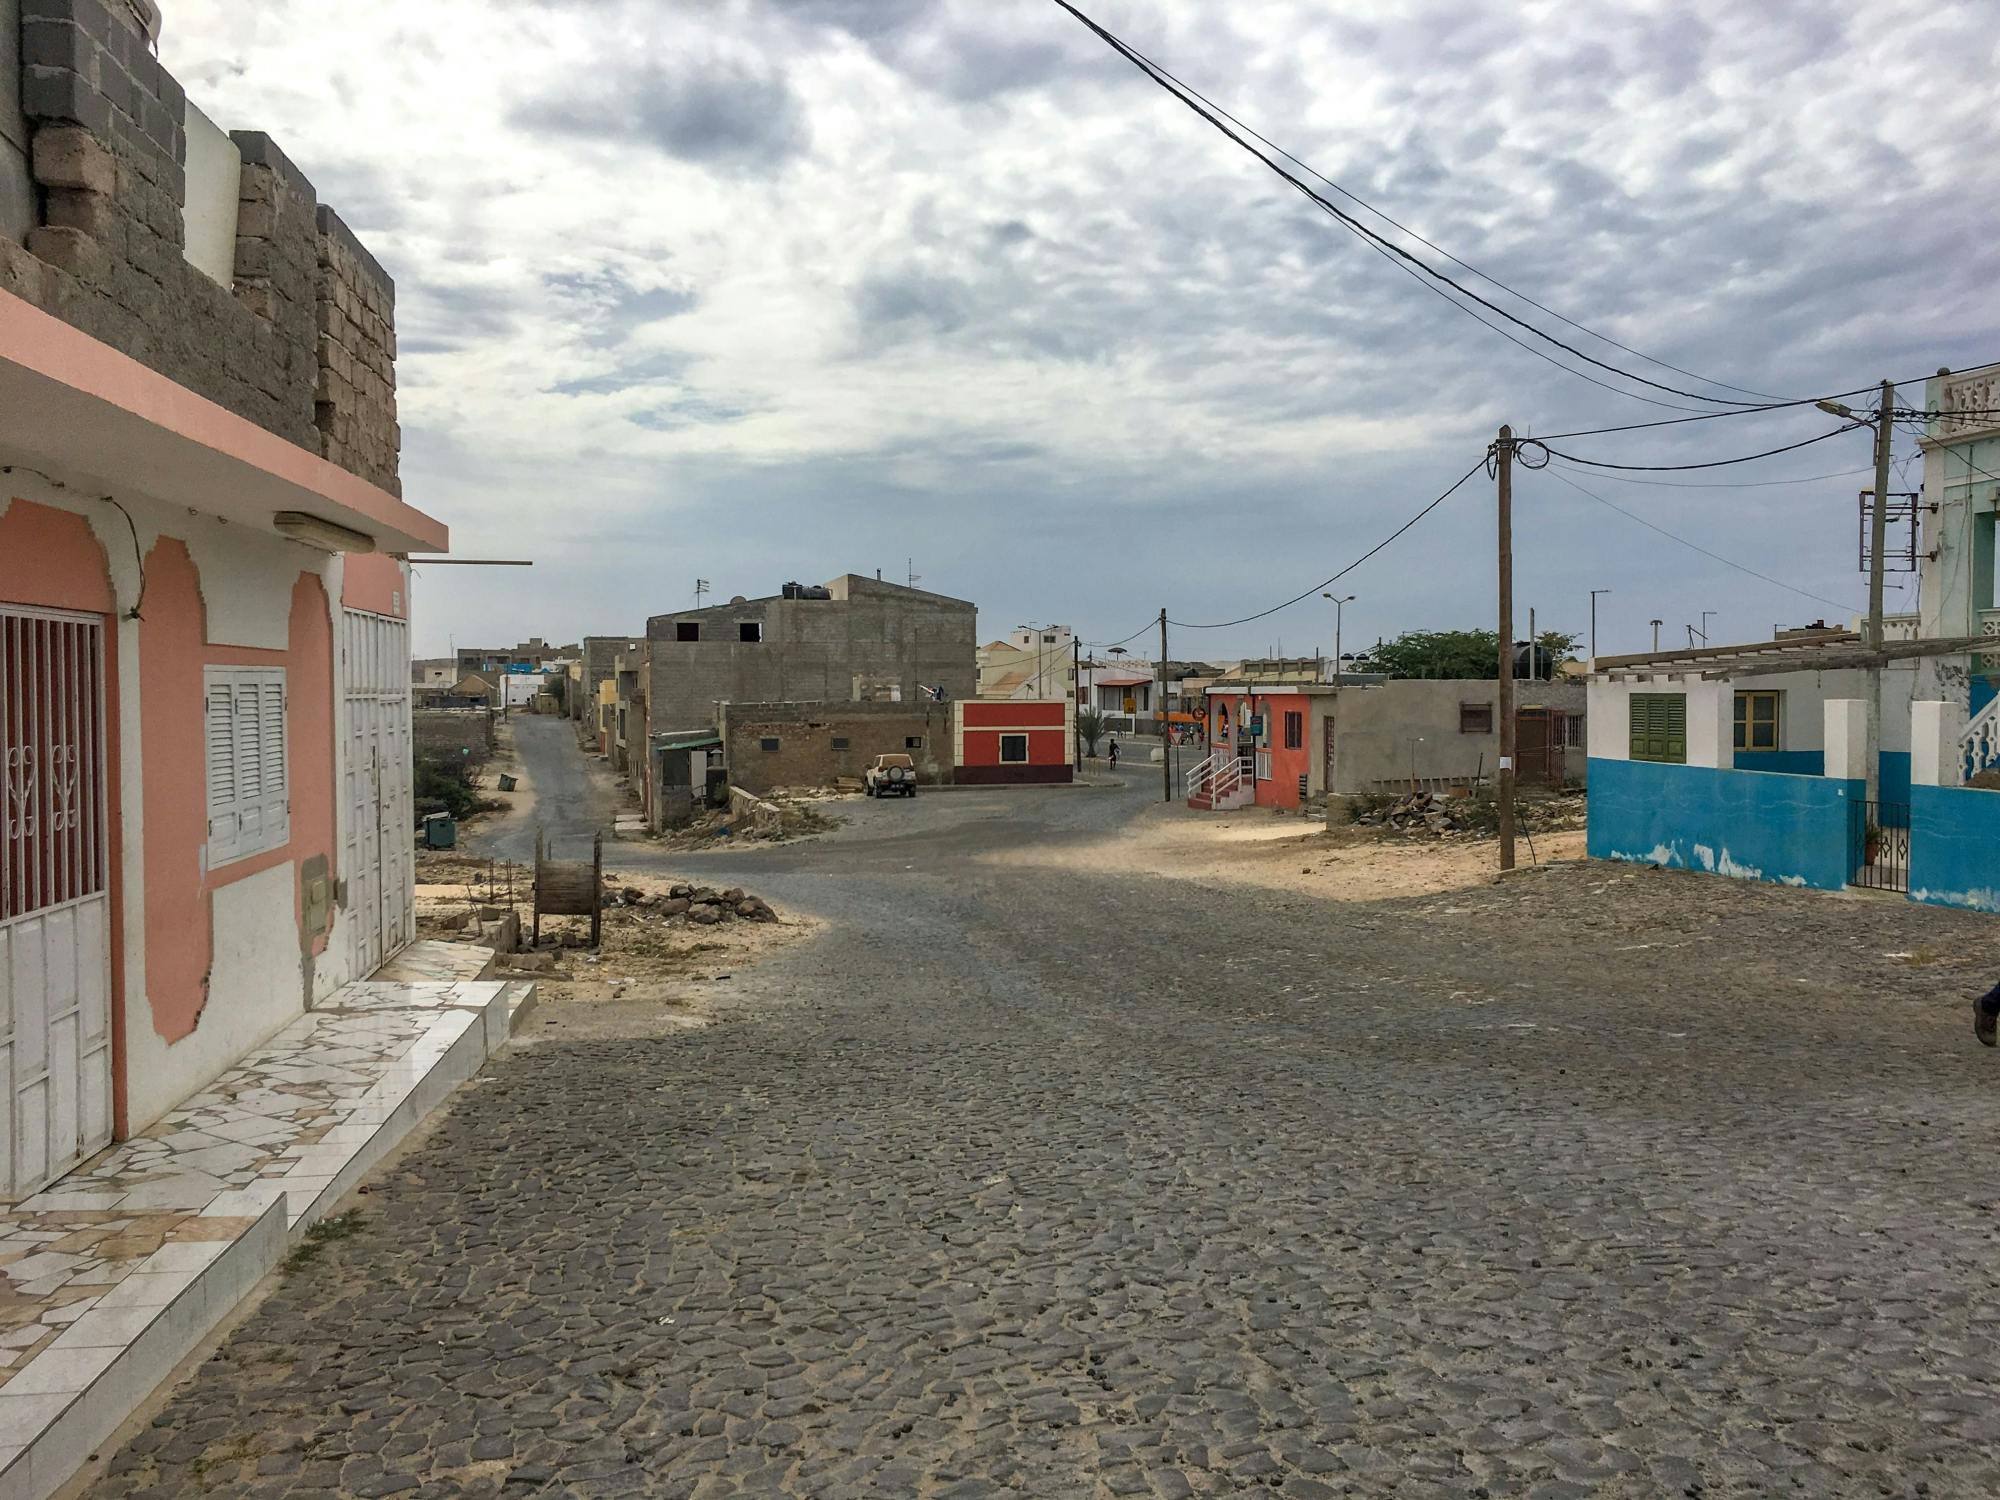 Postcards of Boa Vista 4x4 Tour with Shipwreck and Local Lunch